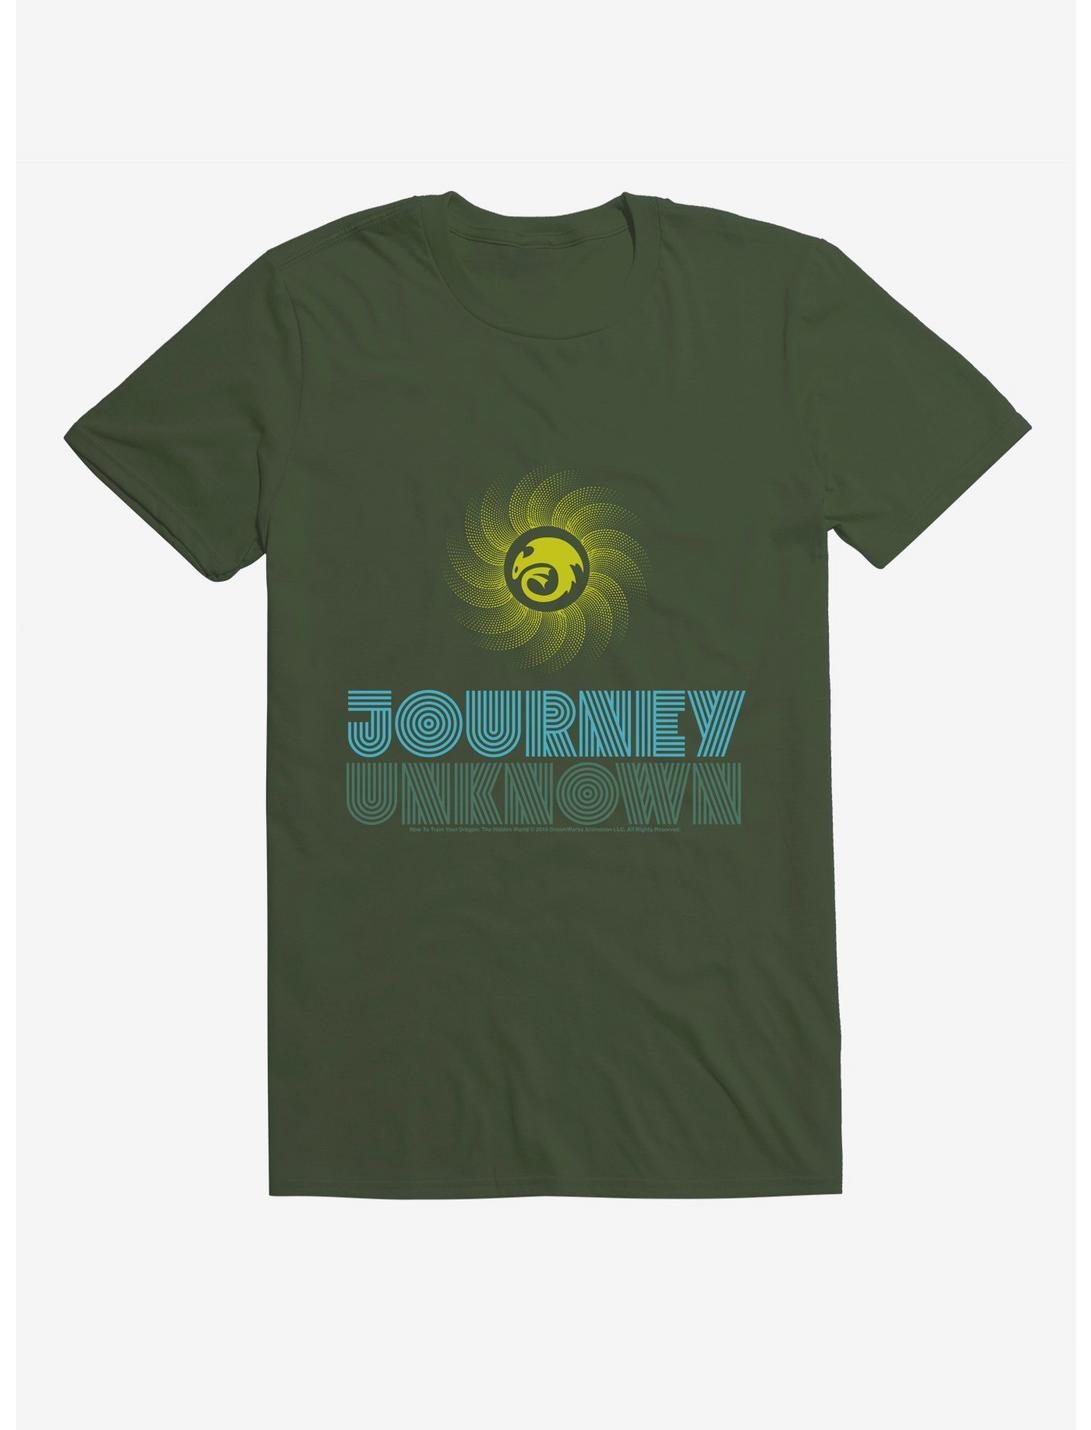 How To Train Your Dragon Journey Unknown T-Shirt, FOREST GREEN, hi-res